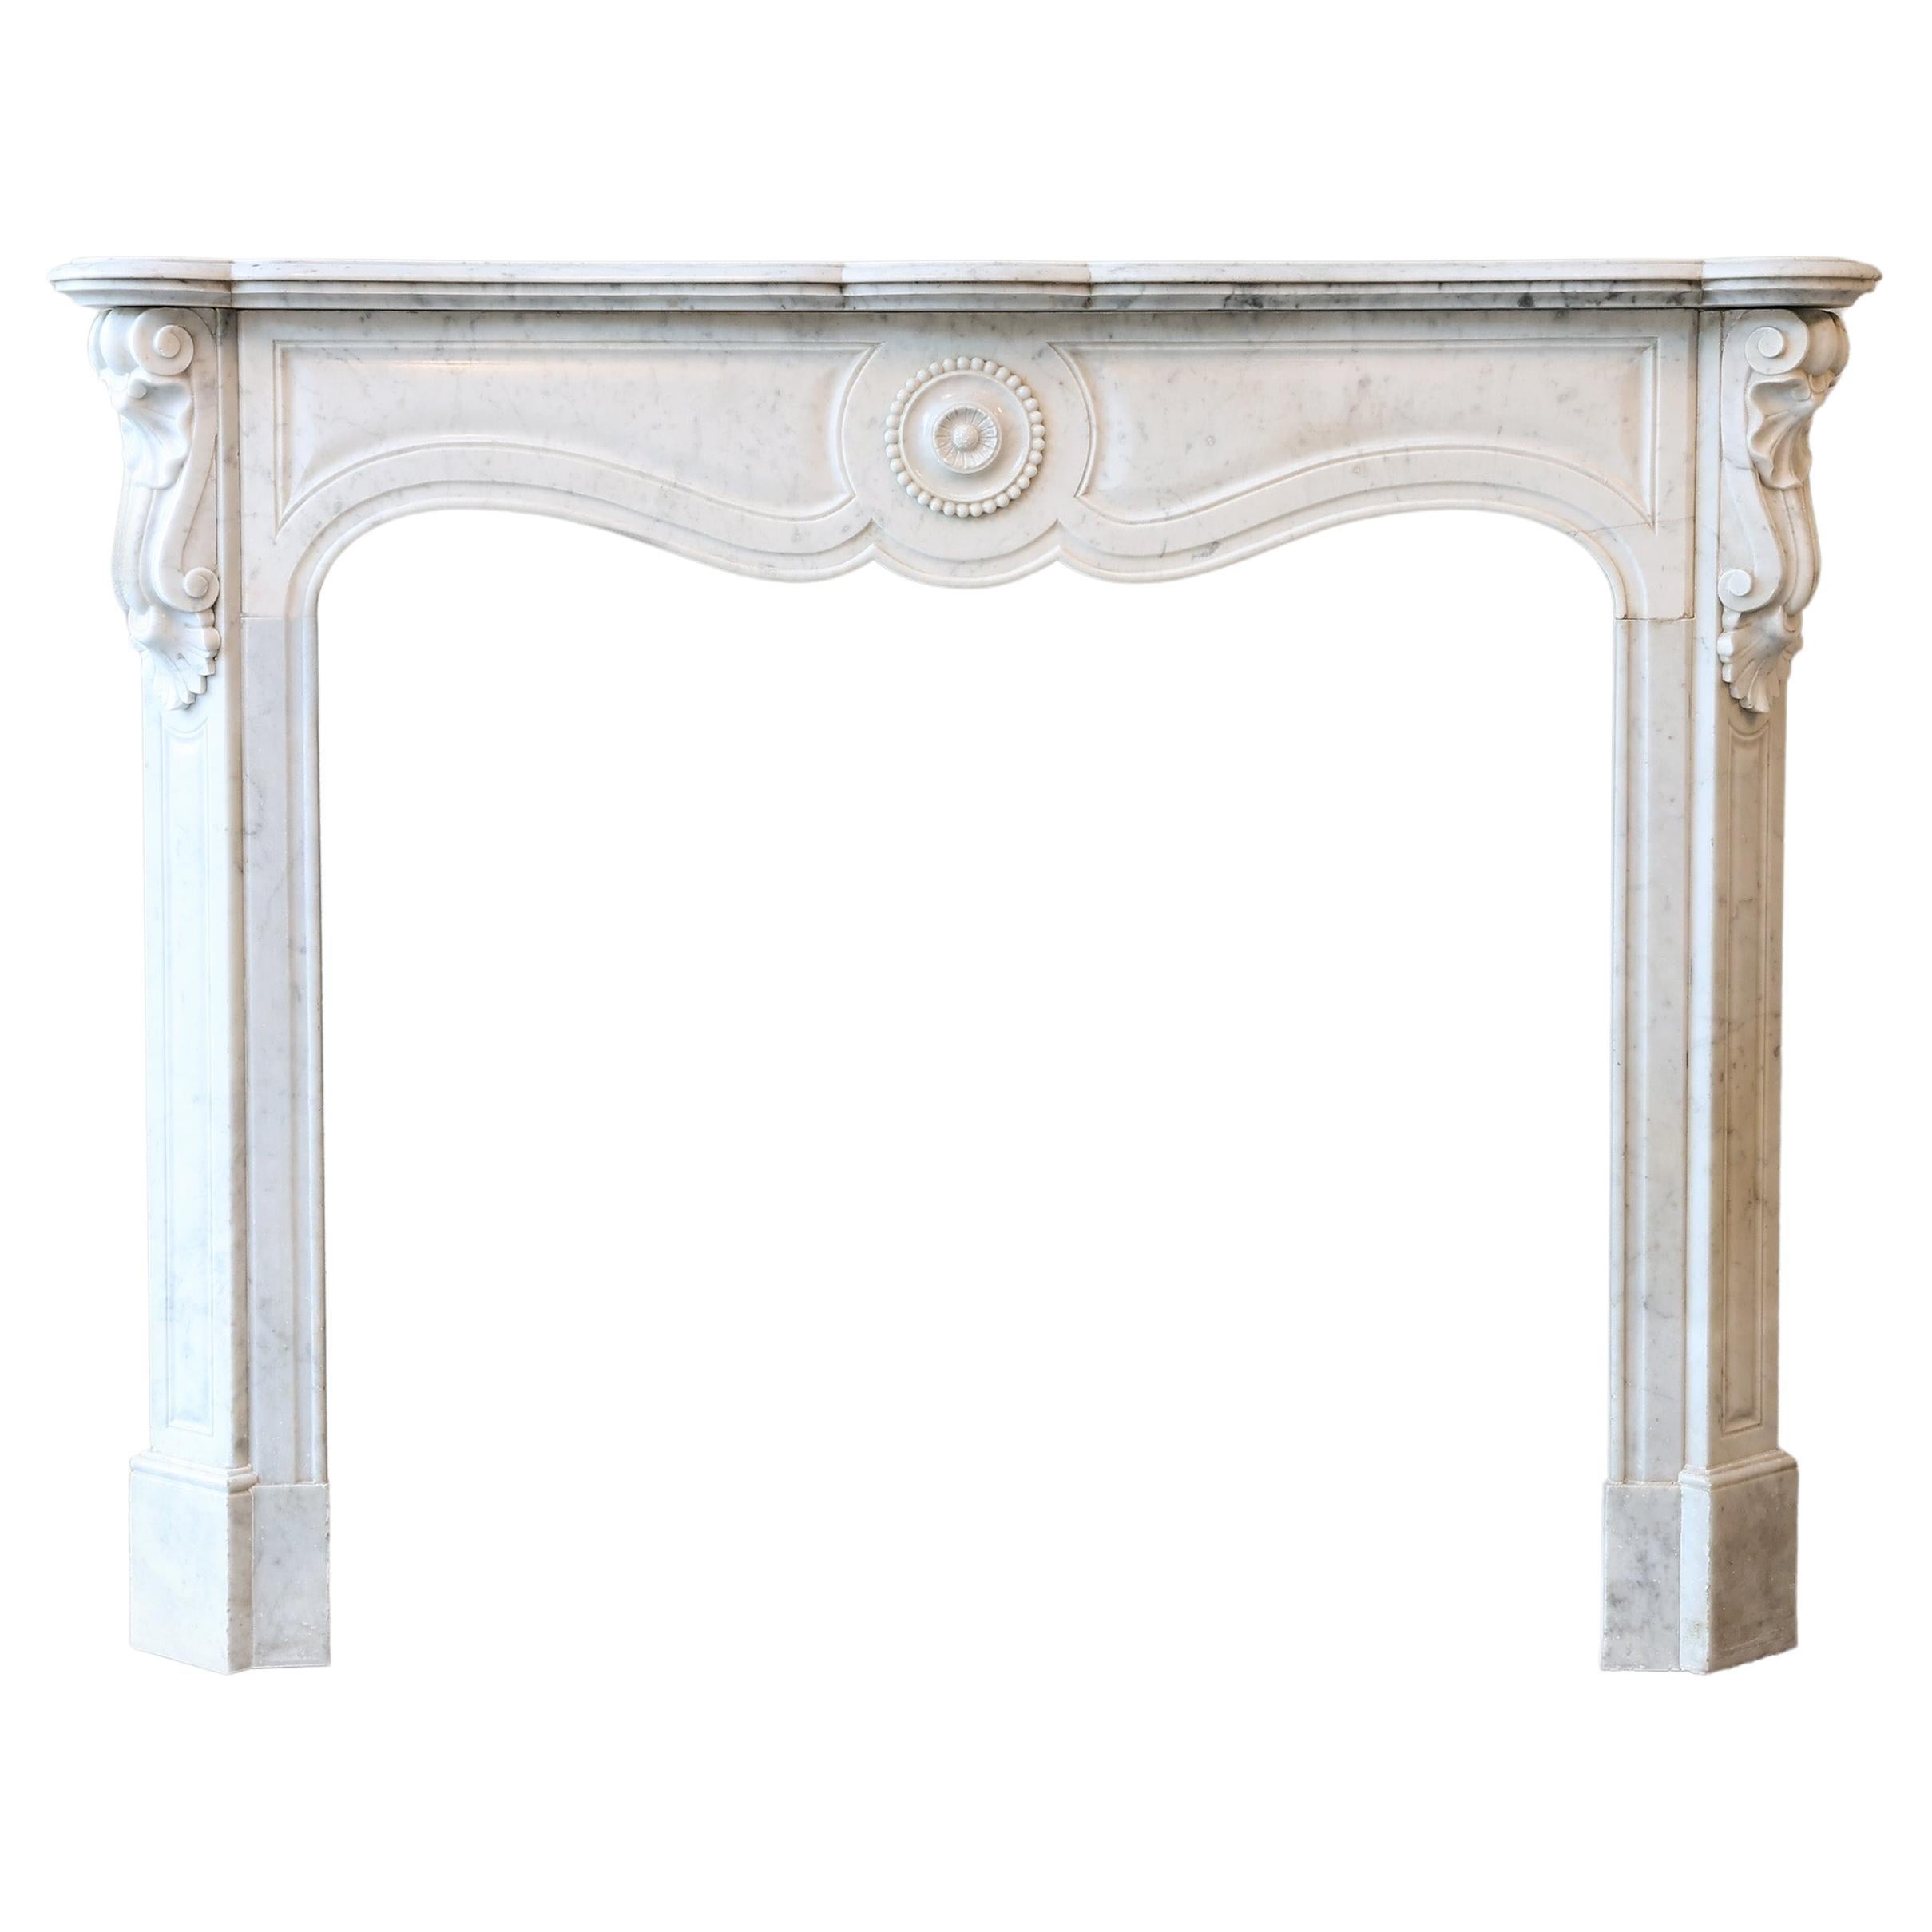 Carrara Marble Fireplace in the Style of Pompadour from the 19th Century